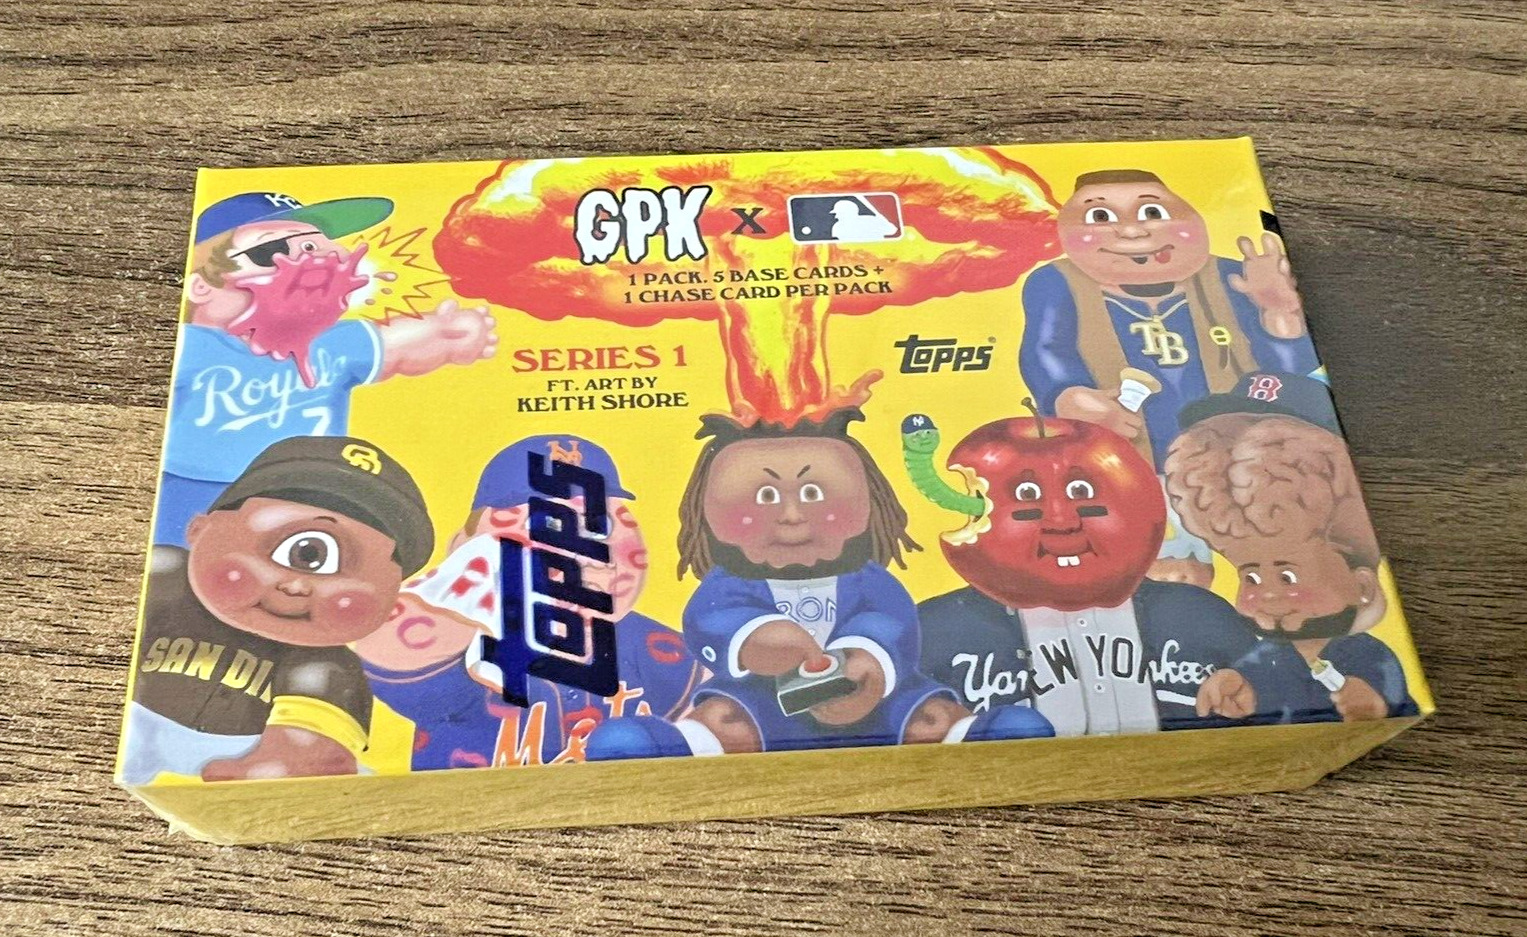 2022 Topps MLB X Garbage Pail Kids GPK Series One by Keith Shore 1 Pack Box